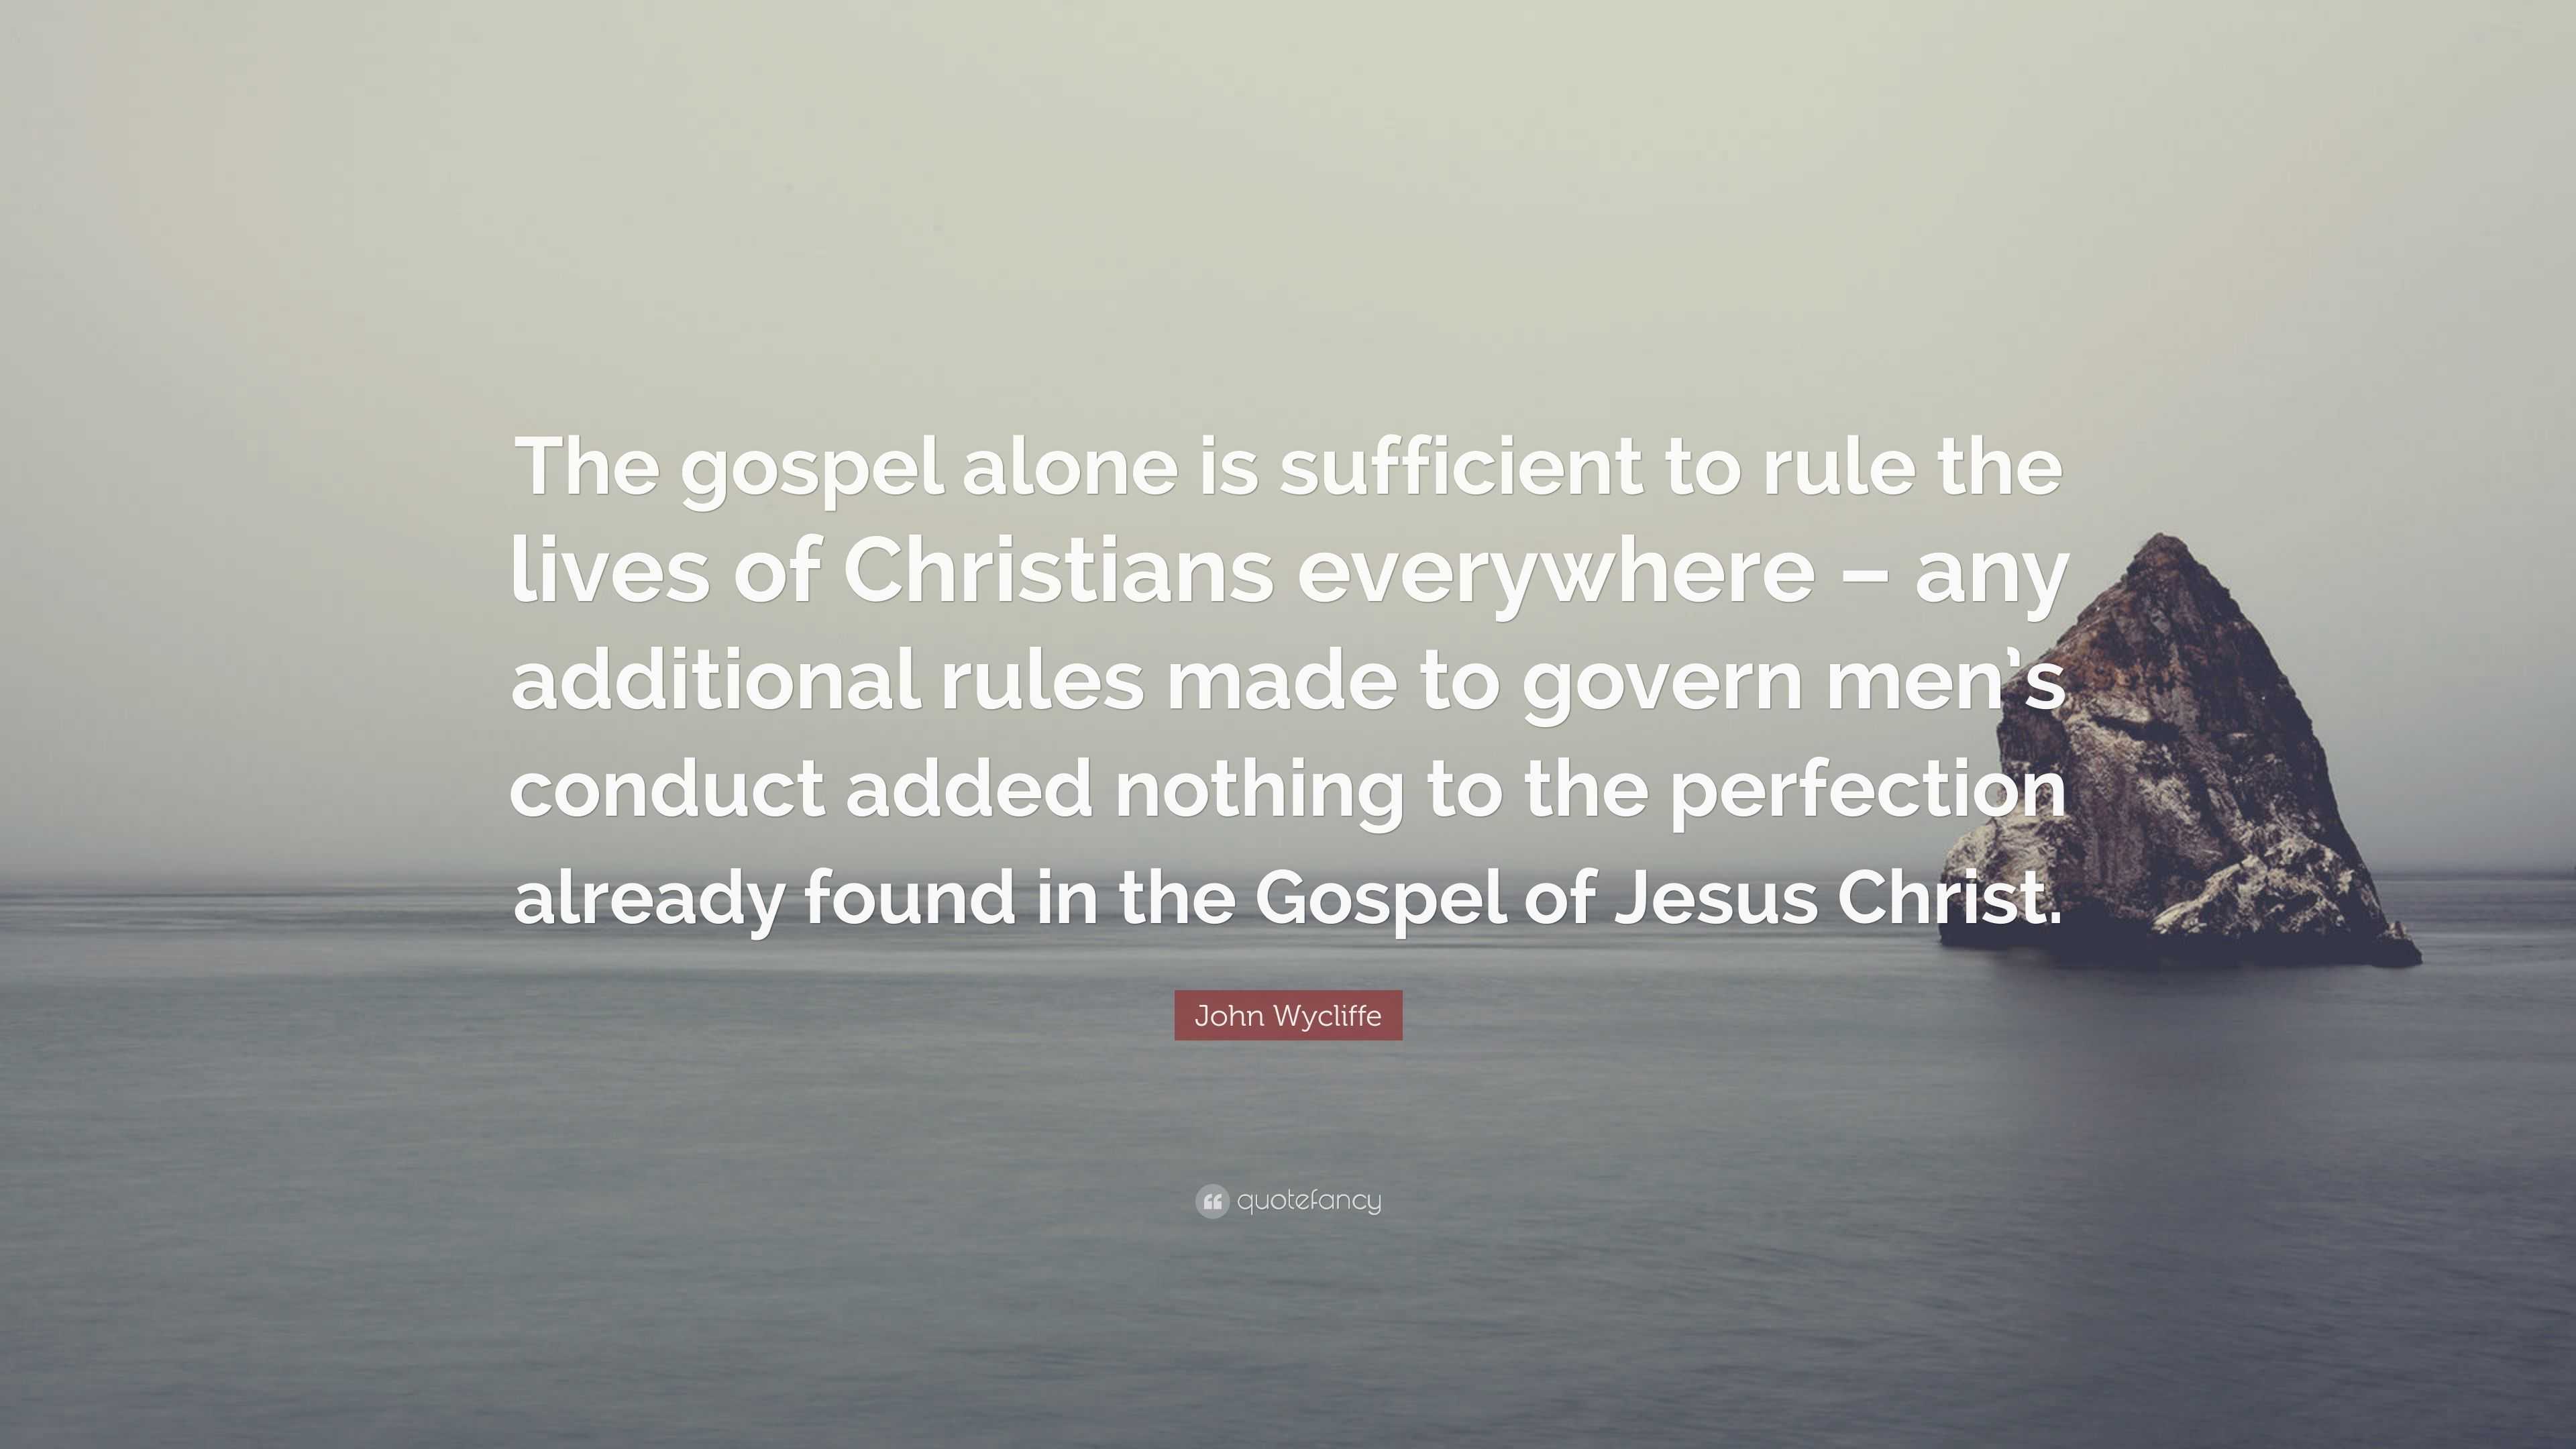 John Wycliffe Quote: “The gospel alone is sufficient to rule the lives ...